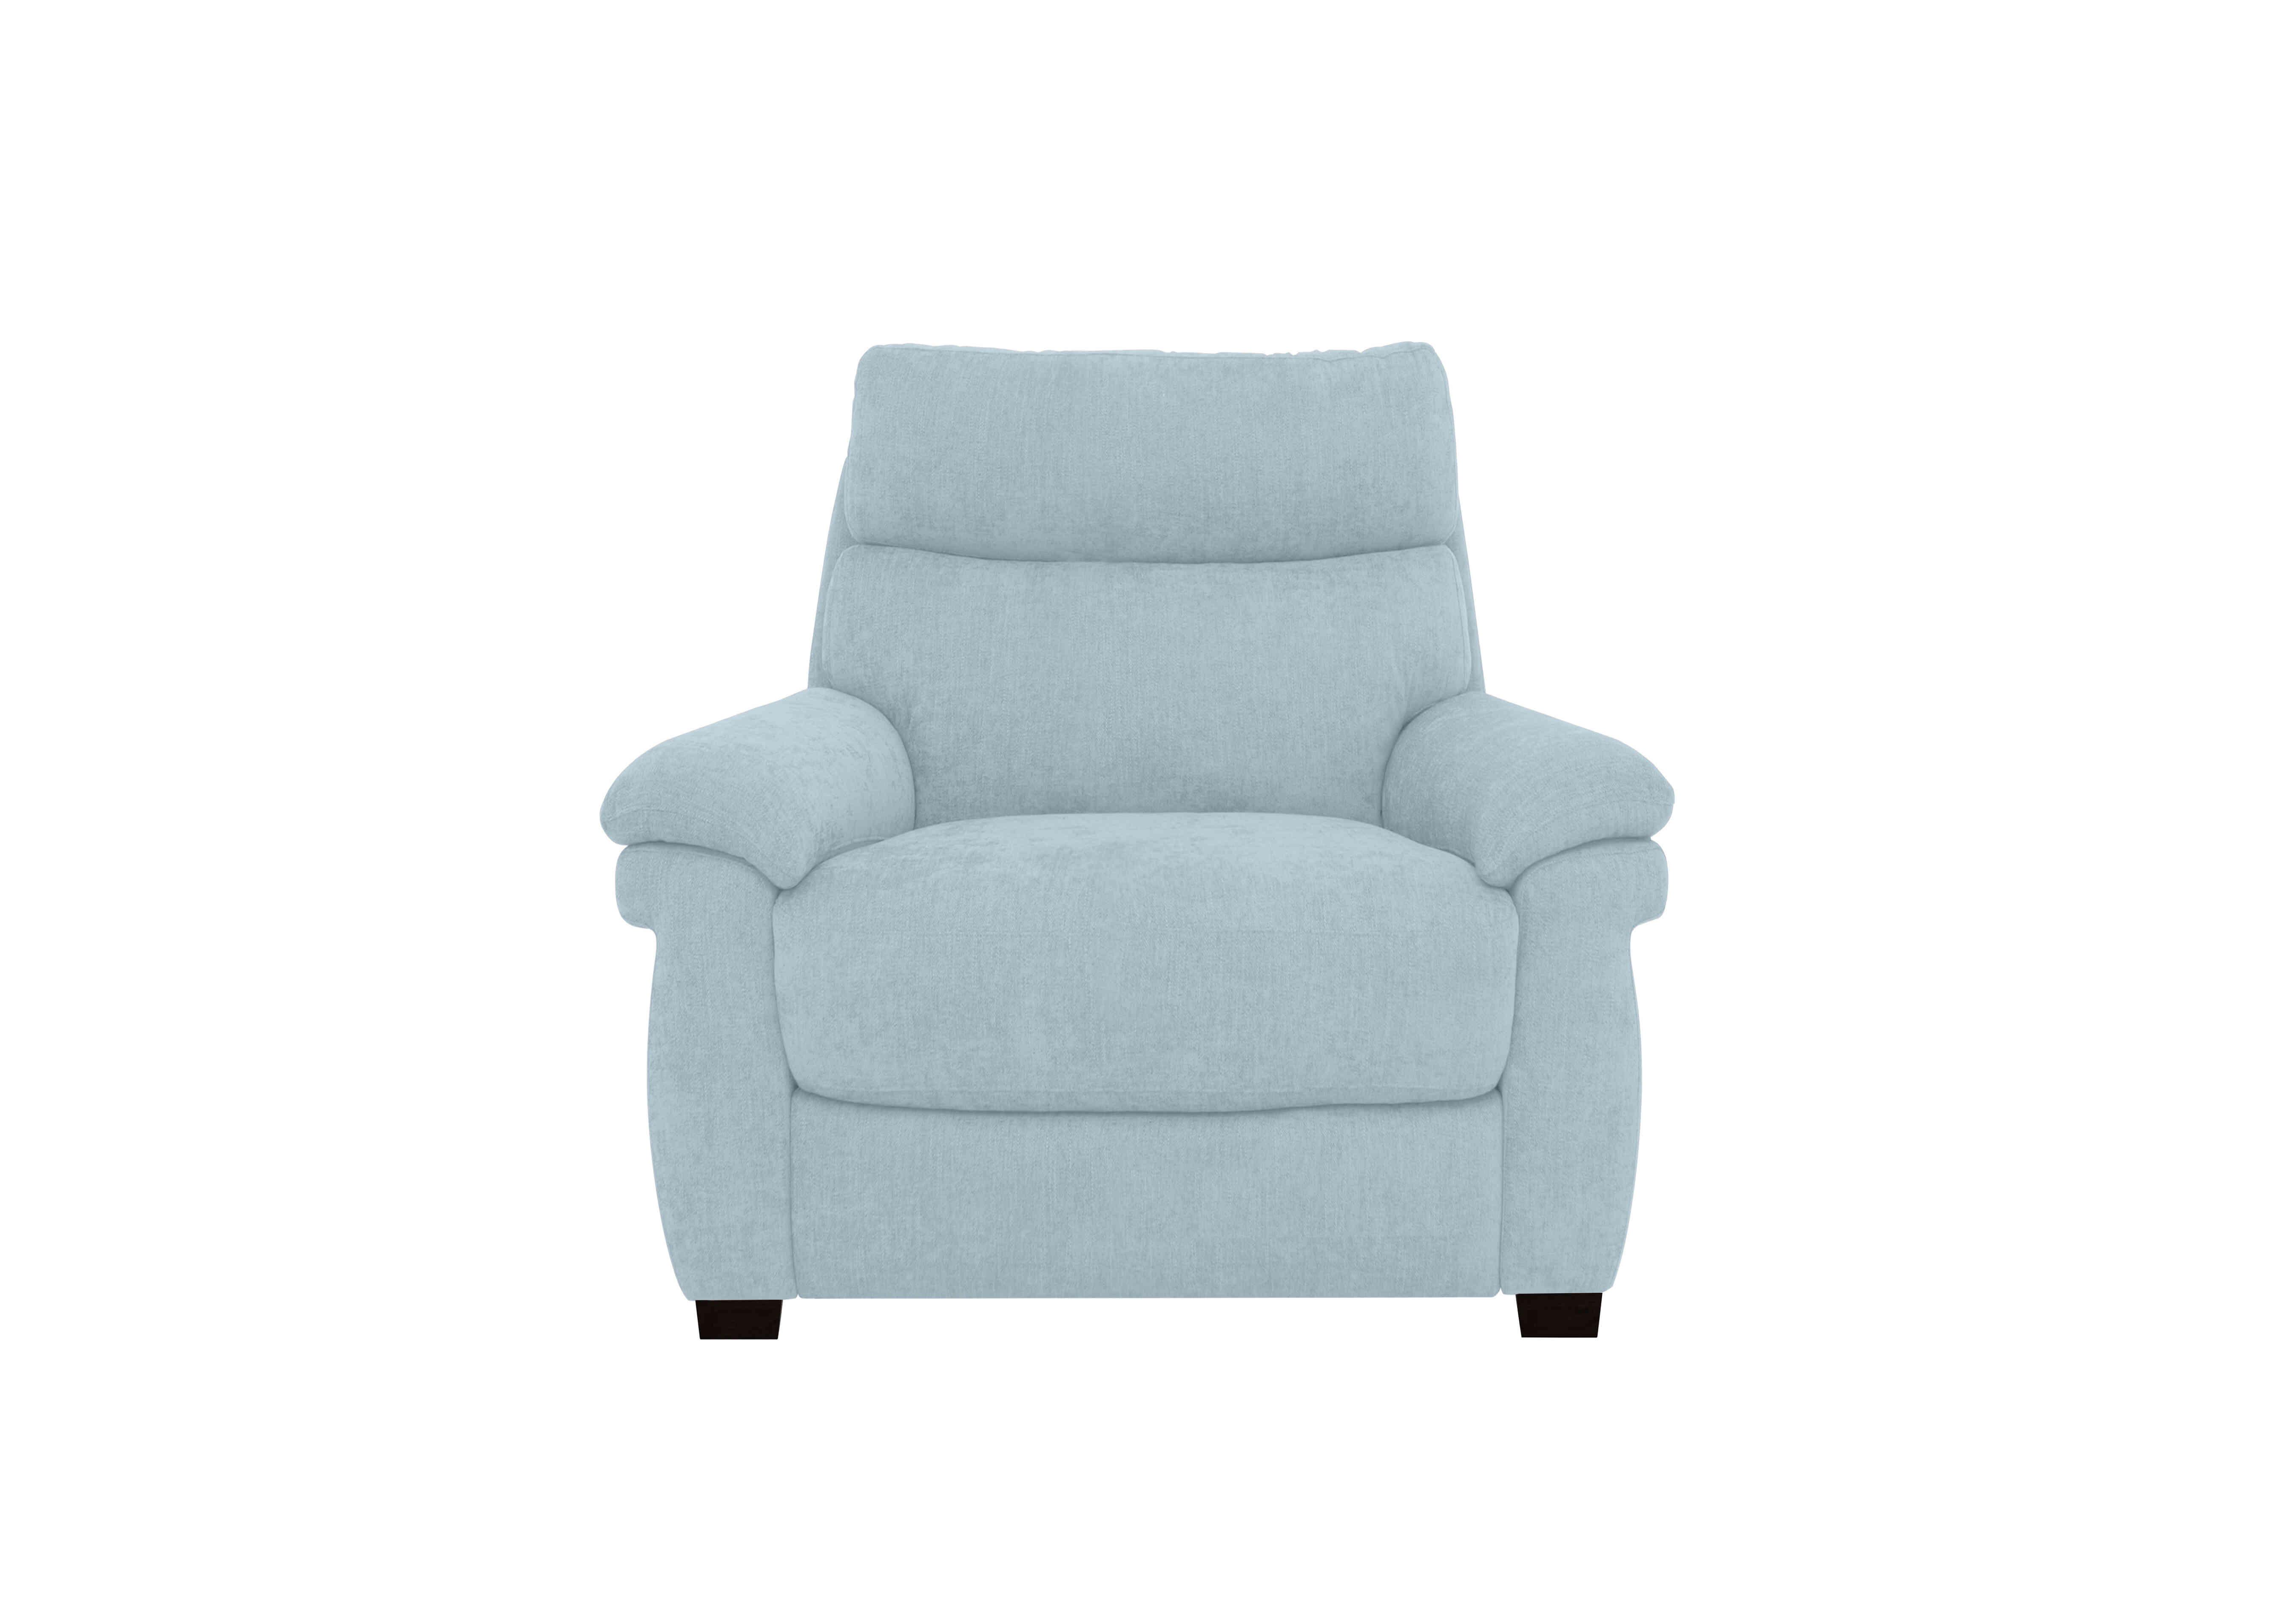 Serene Fabric Chair in Fab-Meo-R17 Baby Blue on Furniture Village